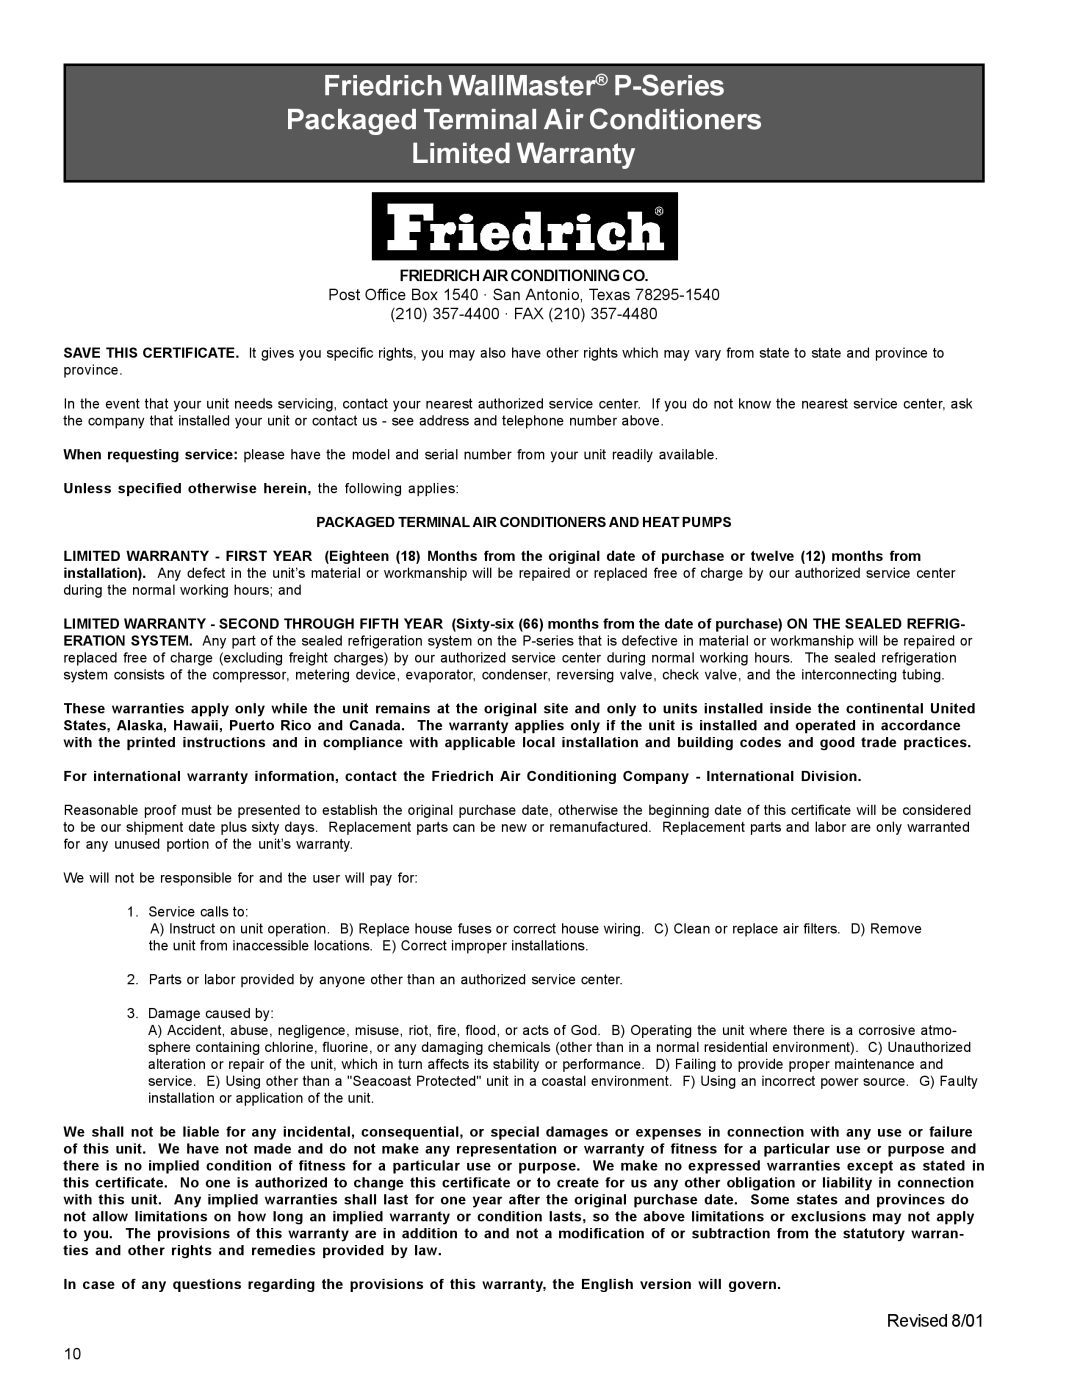 Friedrich PACKAGED TERMINAL AIR CONDITIONERS AND HEAT PUMPS Friedrich WallMaster P-Series, Limited Warranty, Revised 8/01 